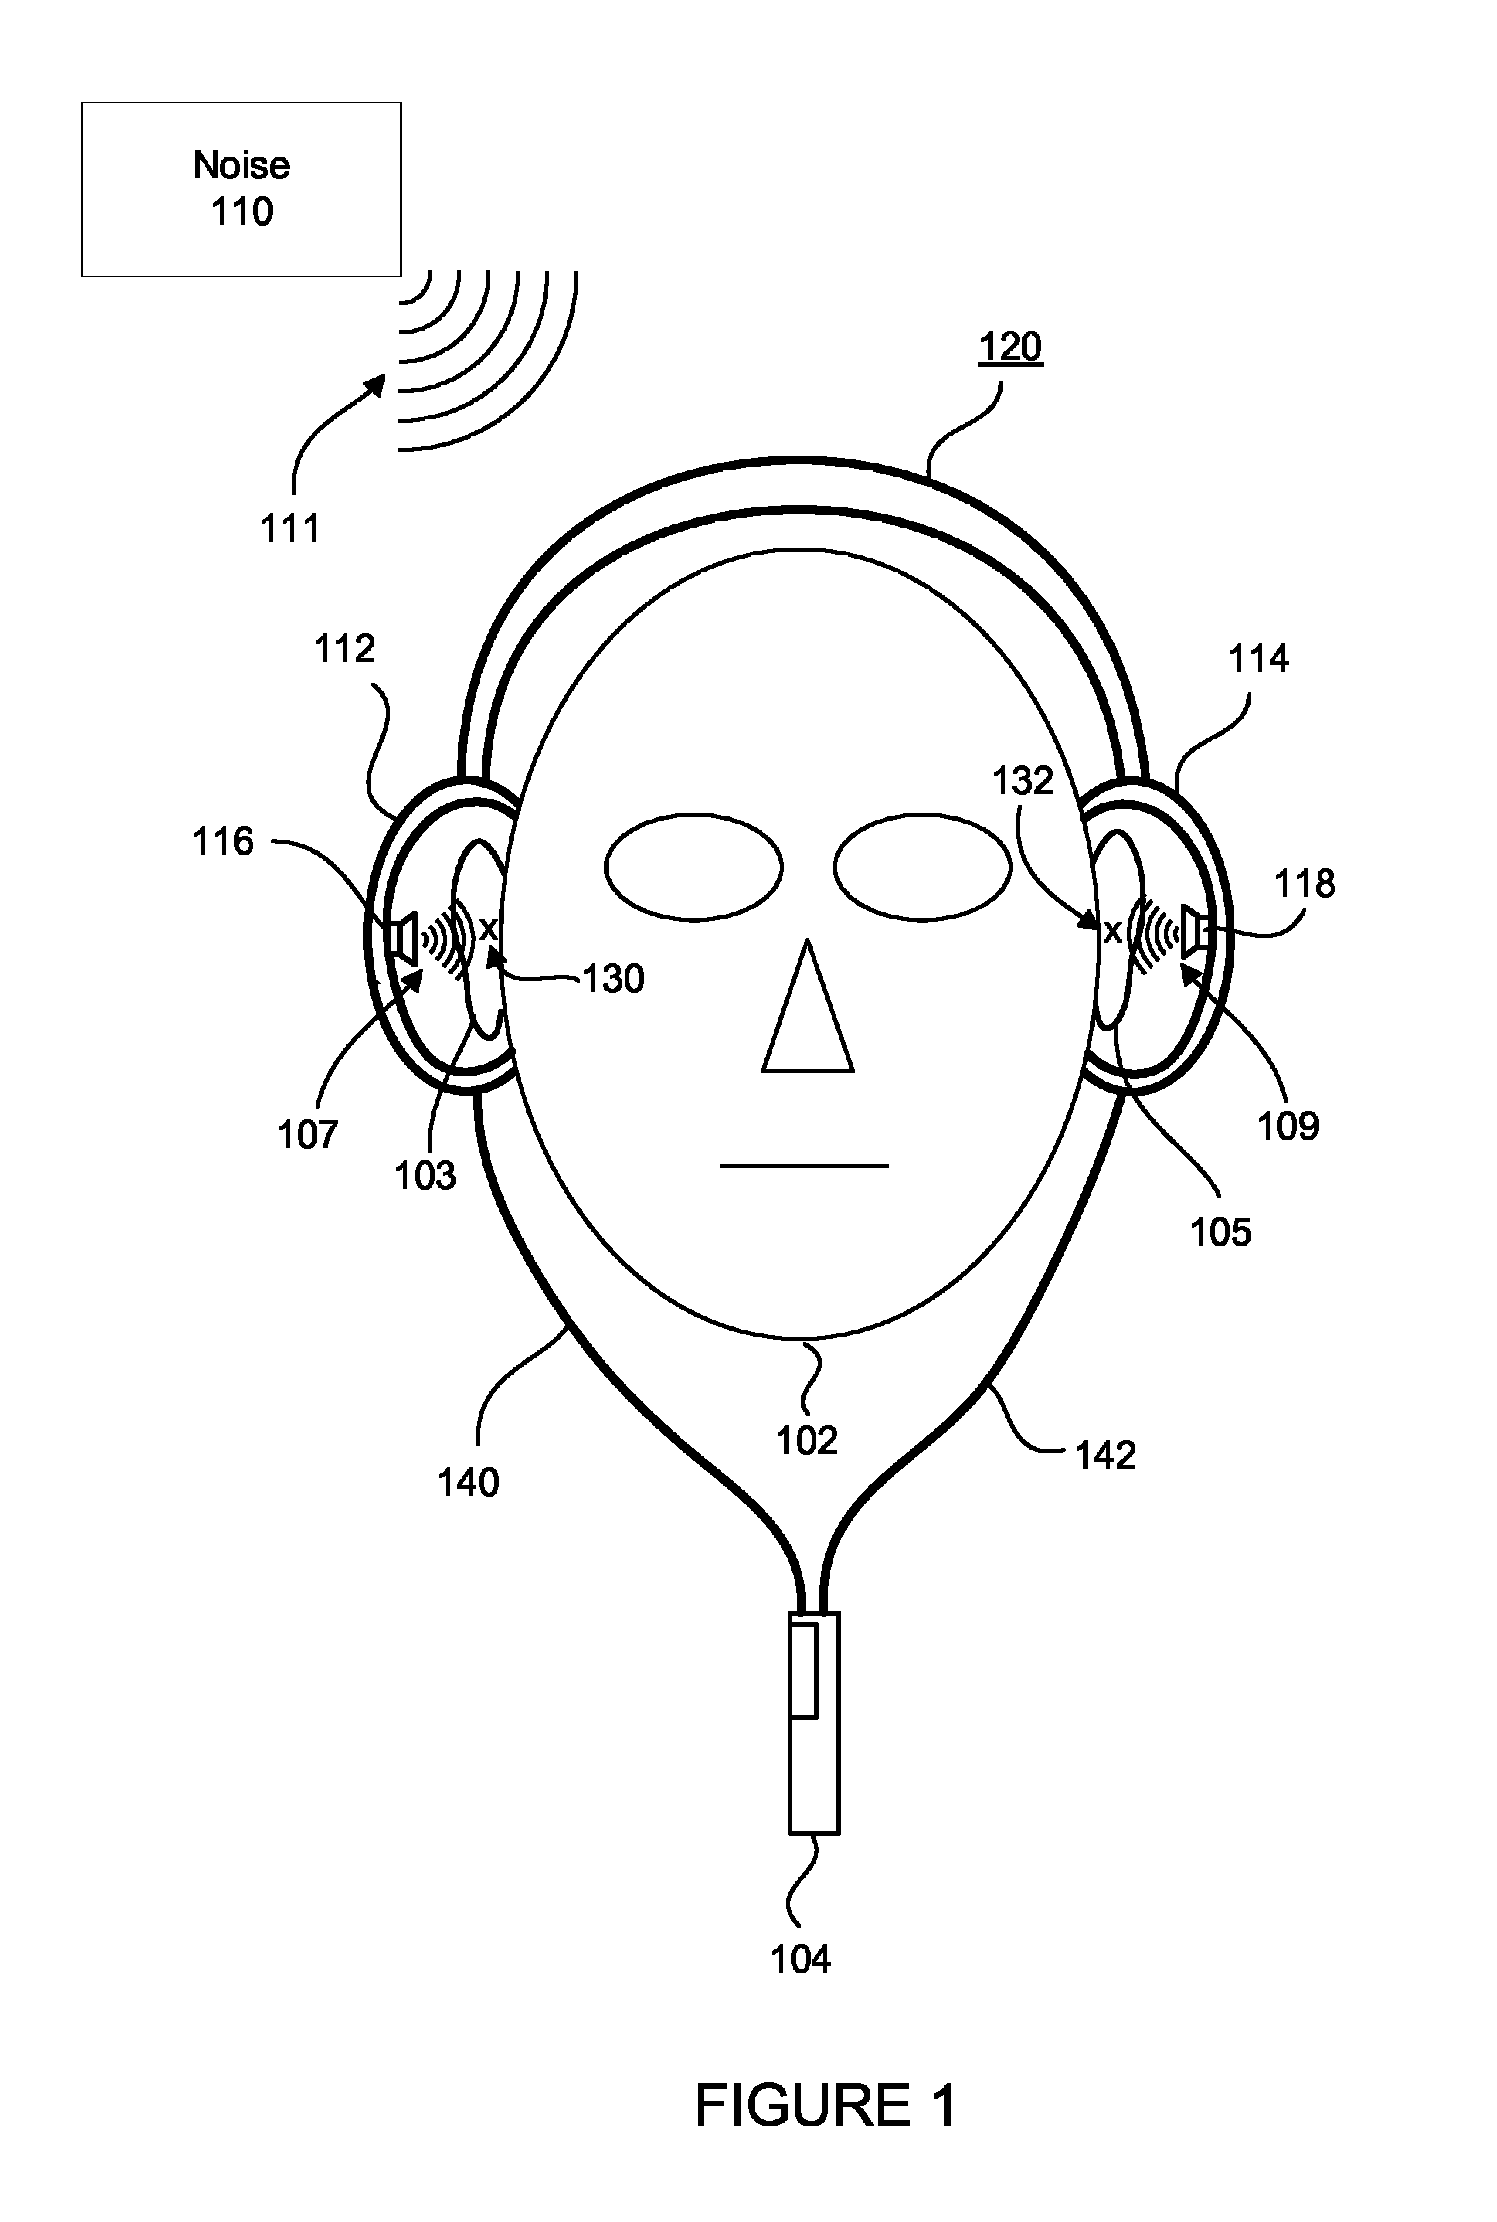 Multi-microphone active noise cancellation system